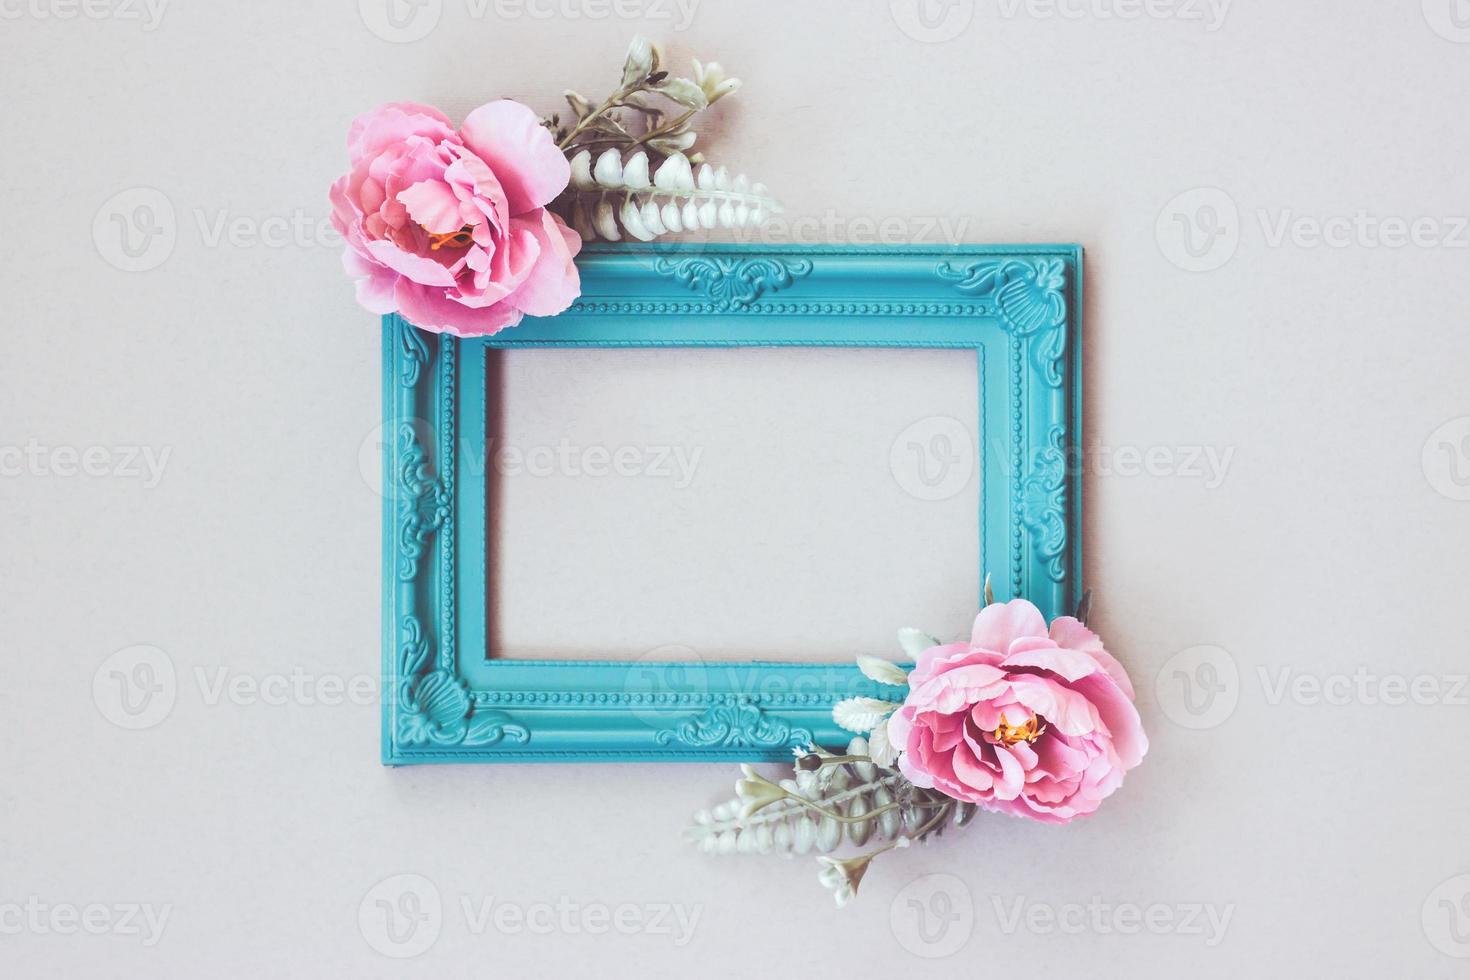 Composition made of decorative picture frame and pastel colored flowers with copy space photo